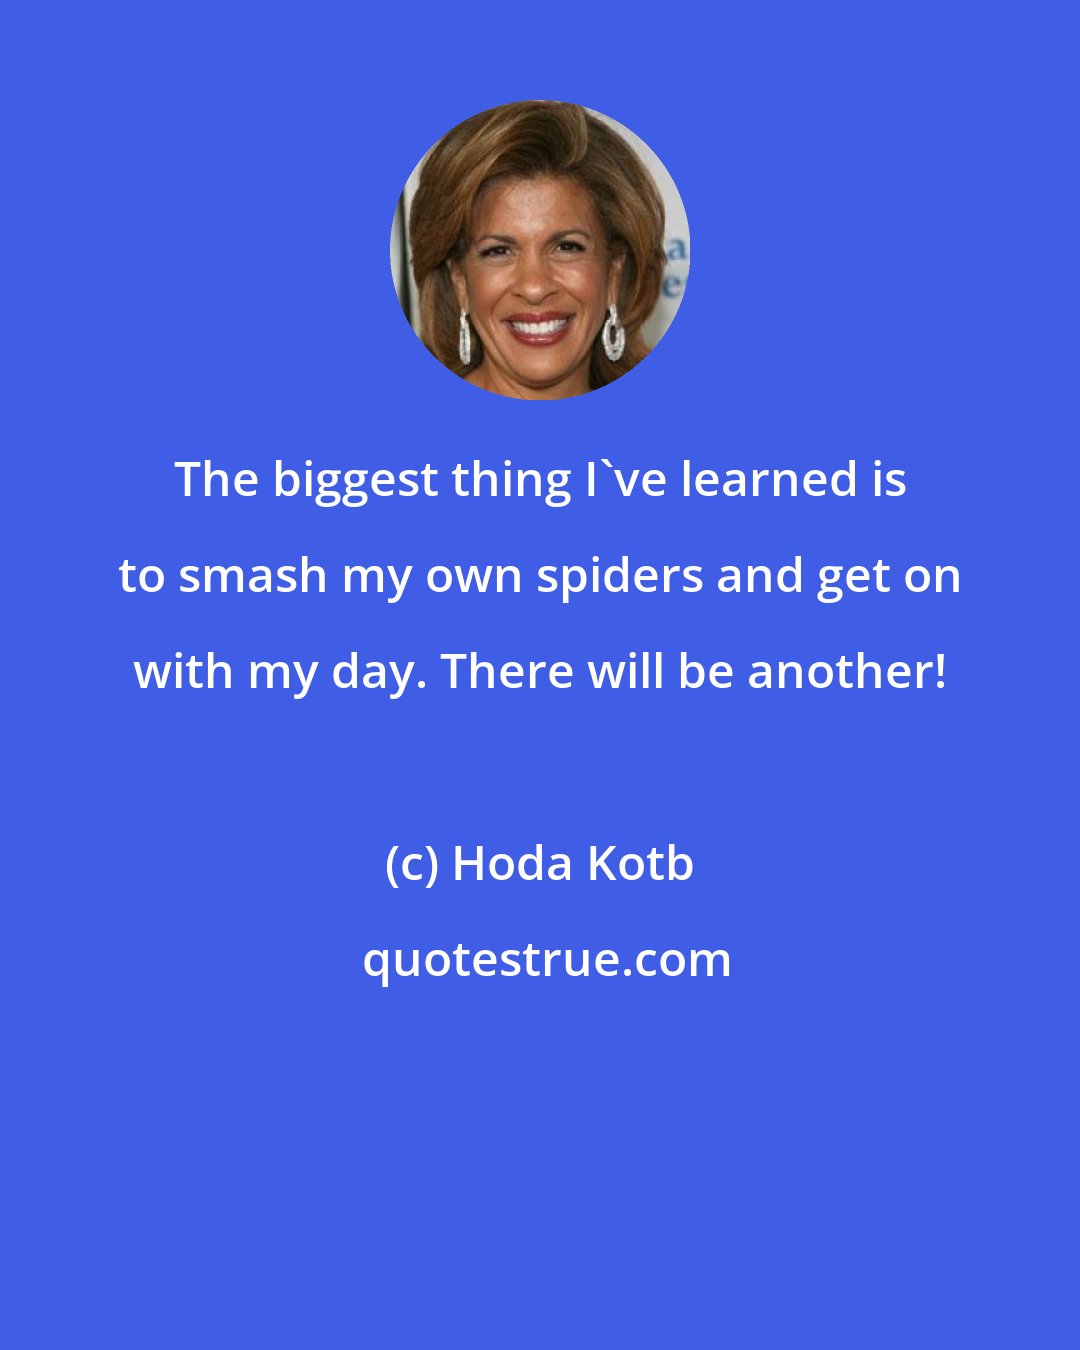 Hoda Kotb: The biggest thing I've learned is to smash my own spiders and get on with my day. There will be another!